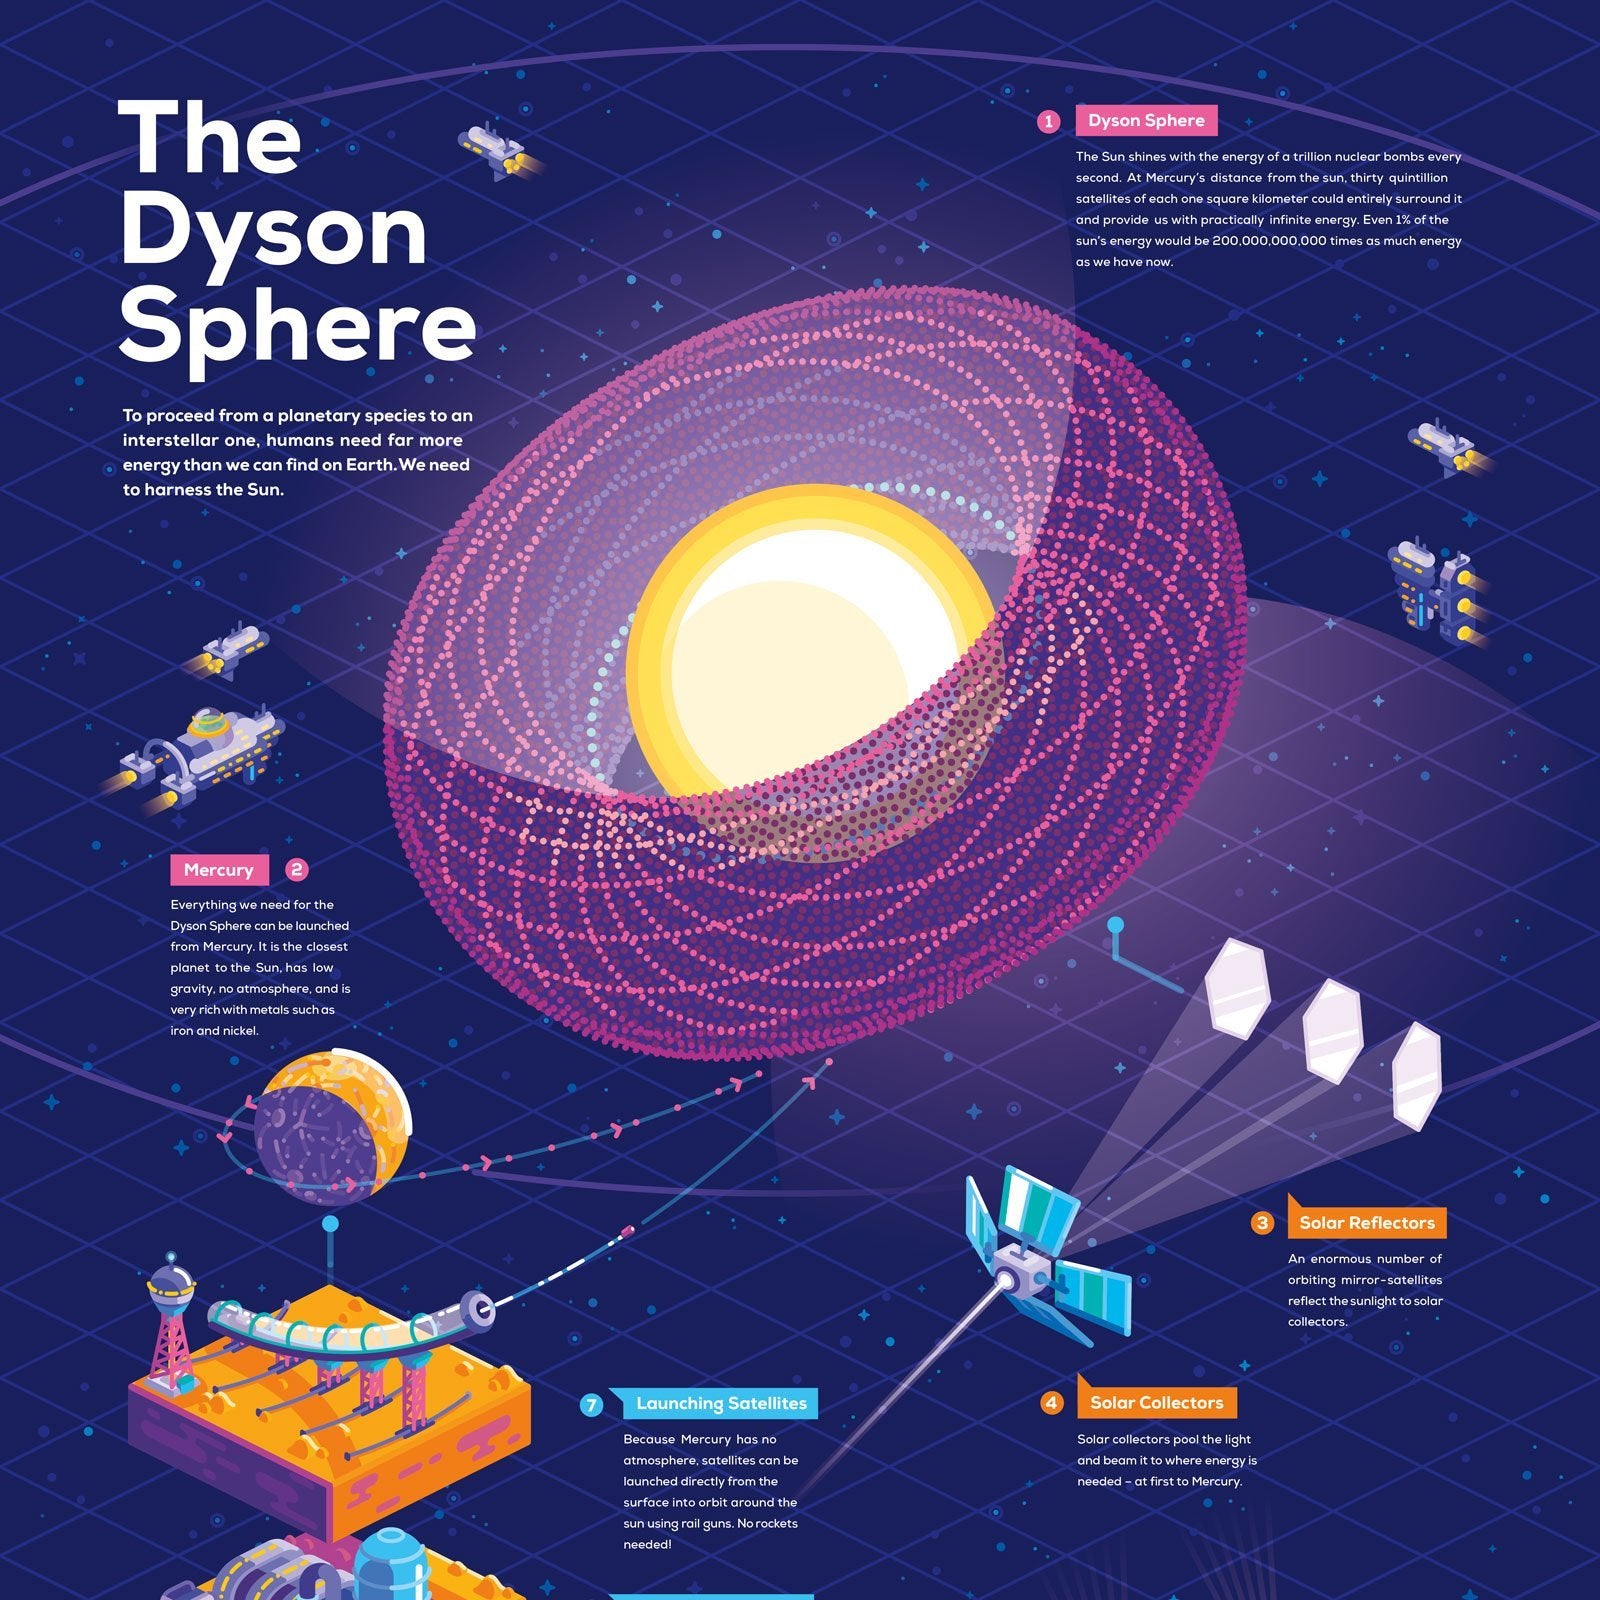 Dyson Sphere Poster Carefully Researched the kurzgesagt shop